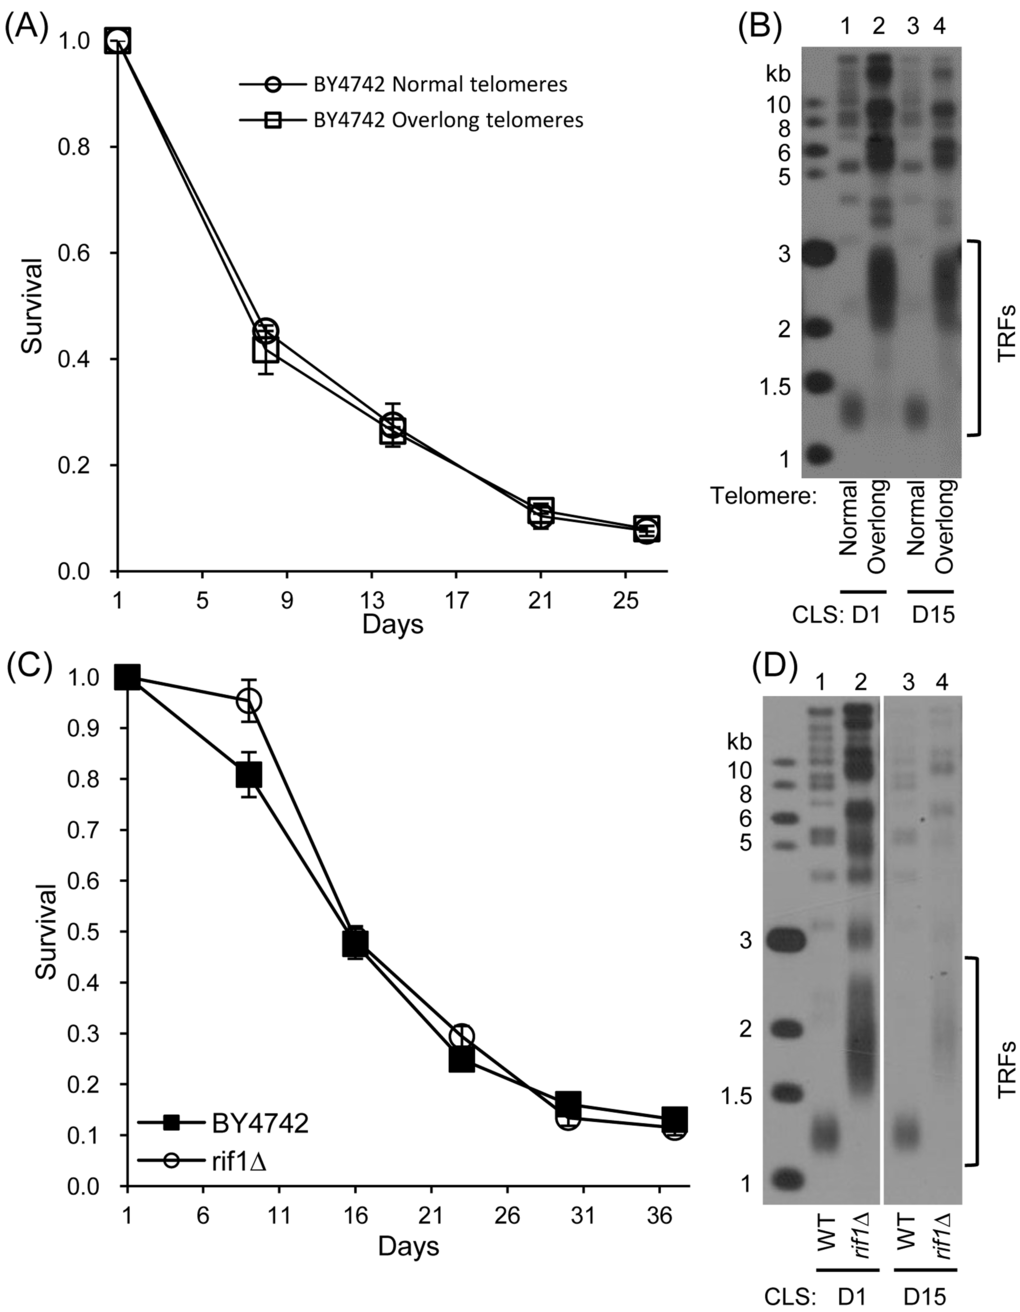 CLS assay of cells with overlong telomeres but no CDC13-EST2 fusion gene (A) CLS of normal- and overlong-telomere cells after plasmids eviction (21st streakout) (B) Southern blot analysis of telomere length using telomeric TG1-3 probe. (C) CLS of wild-type (4th streakout) and rif1∆ (4th streakout). (D) Telomere length detection by Southern blot at CLS D1 and D15.